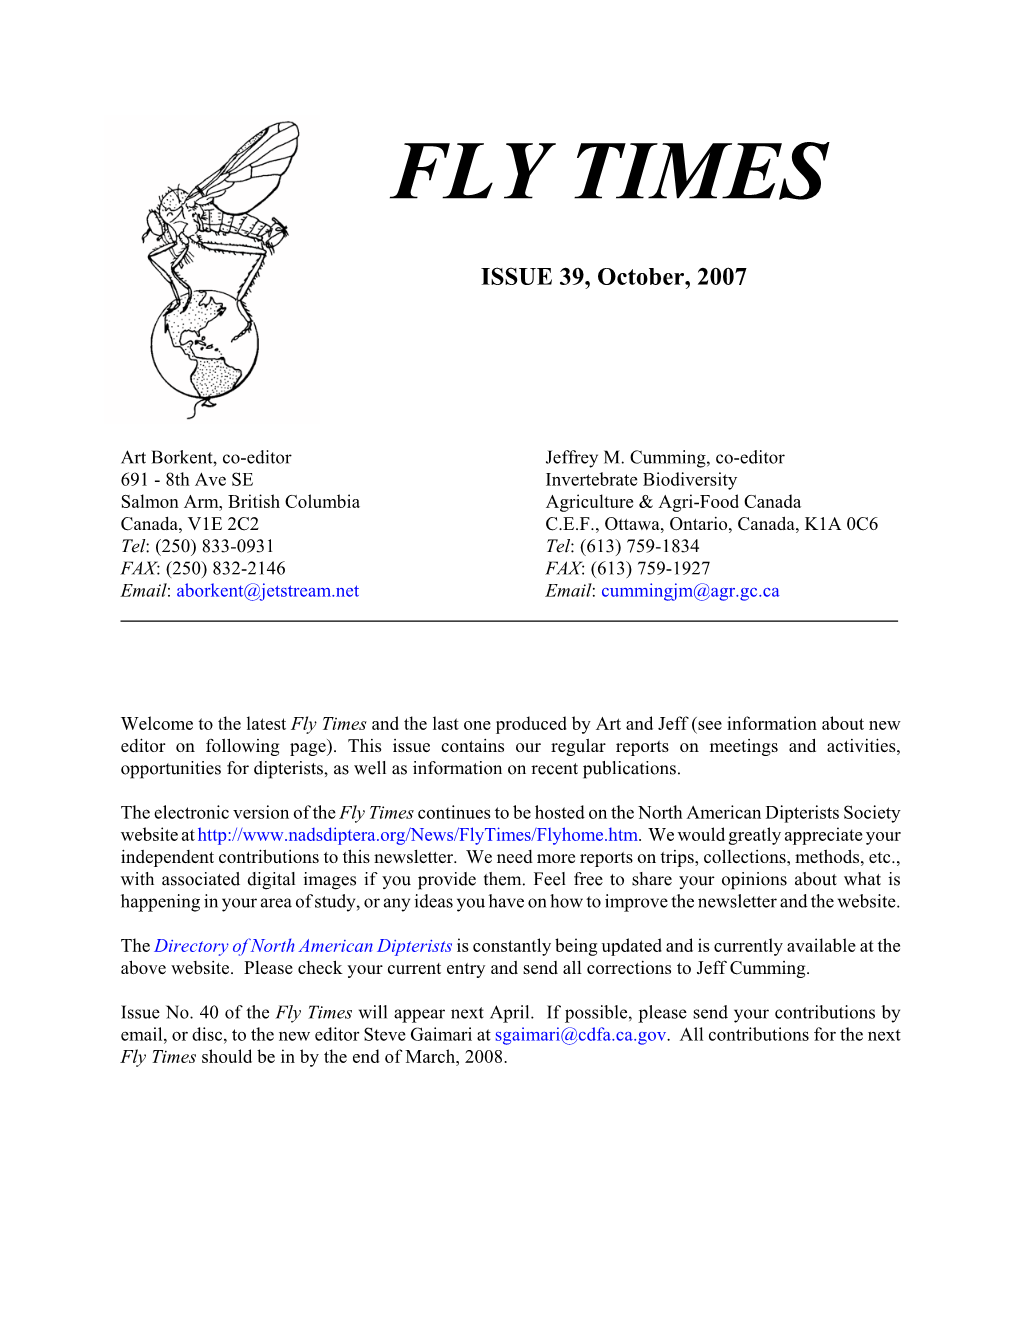 Fly Times 39